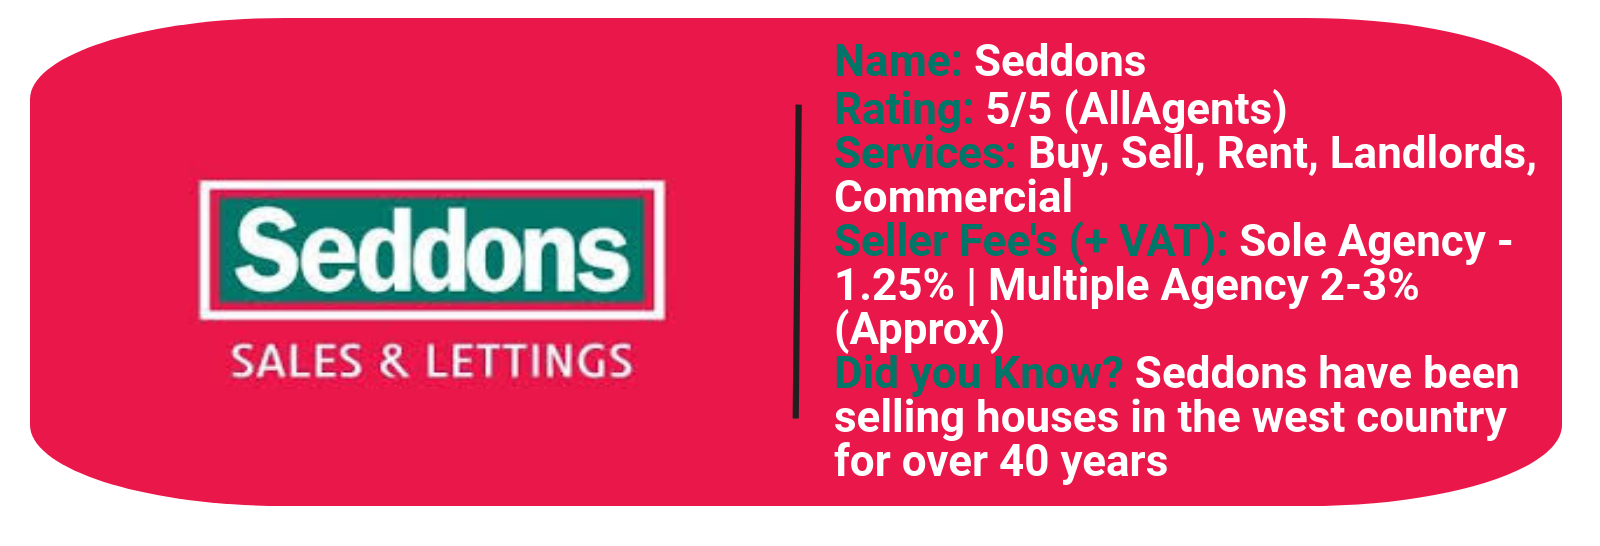 Seddons statistics featuring rating, services & seller fee's